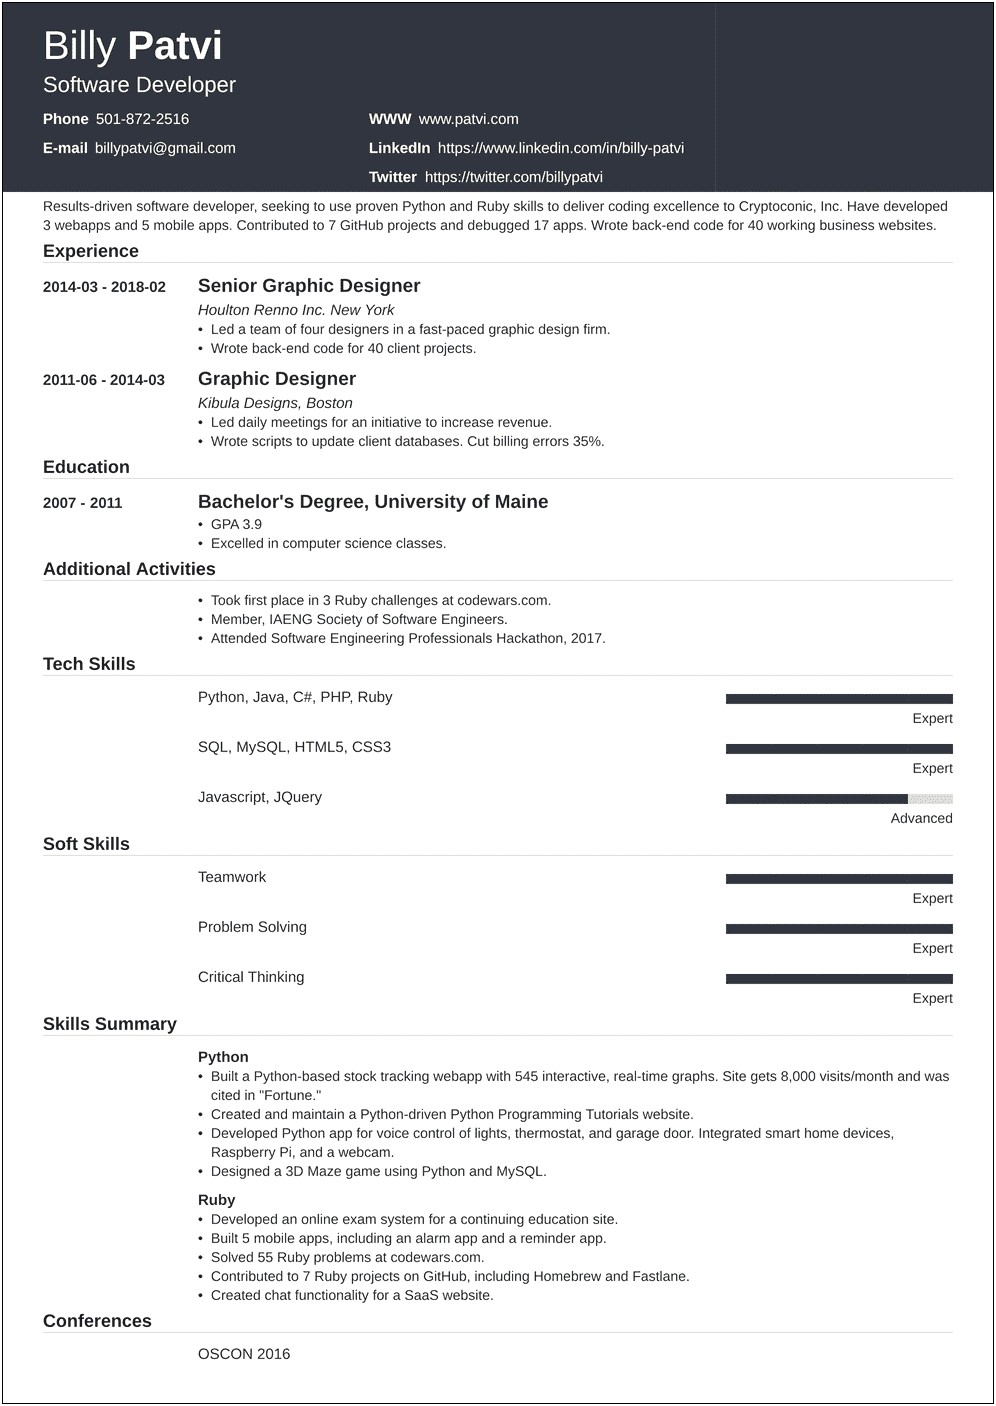 Resume Summary Statement Examples For Career Change